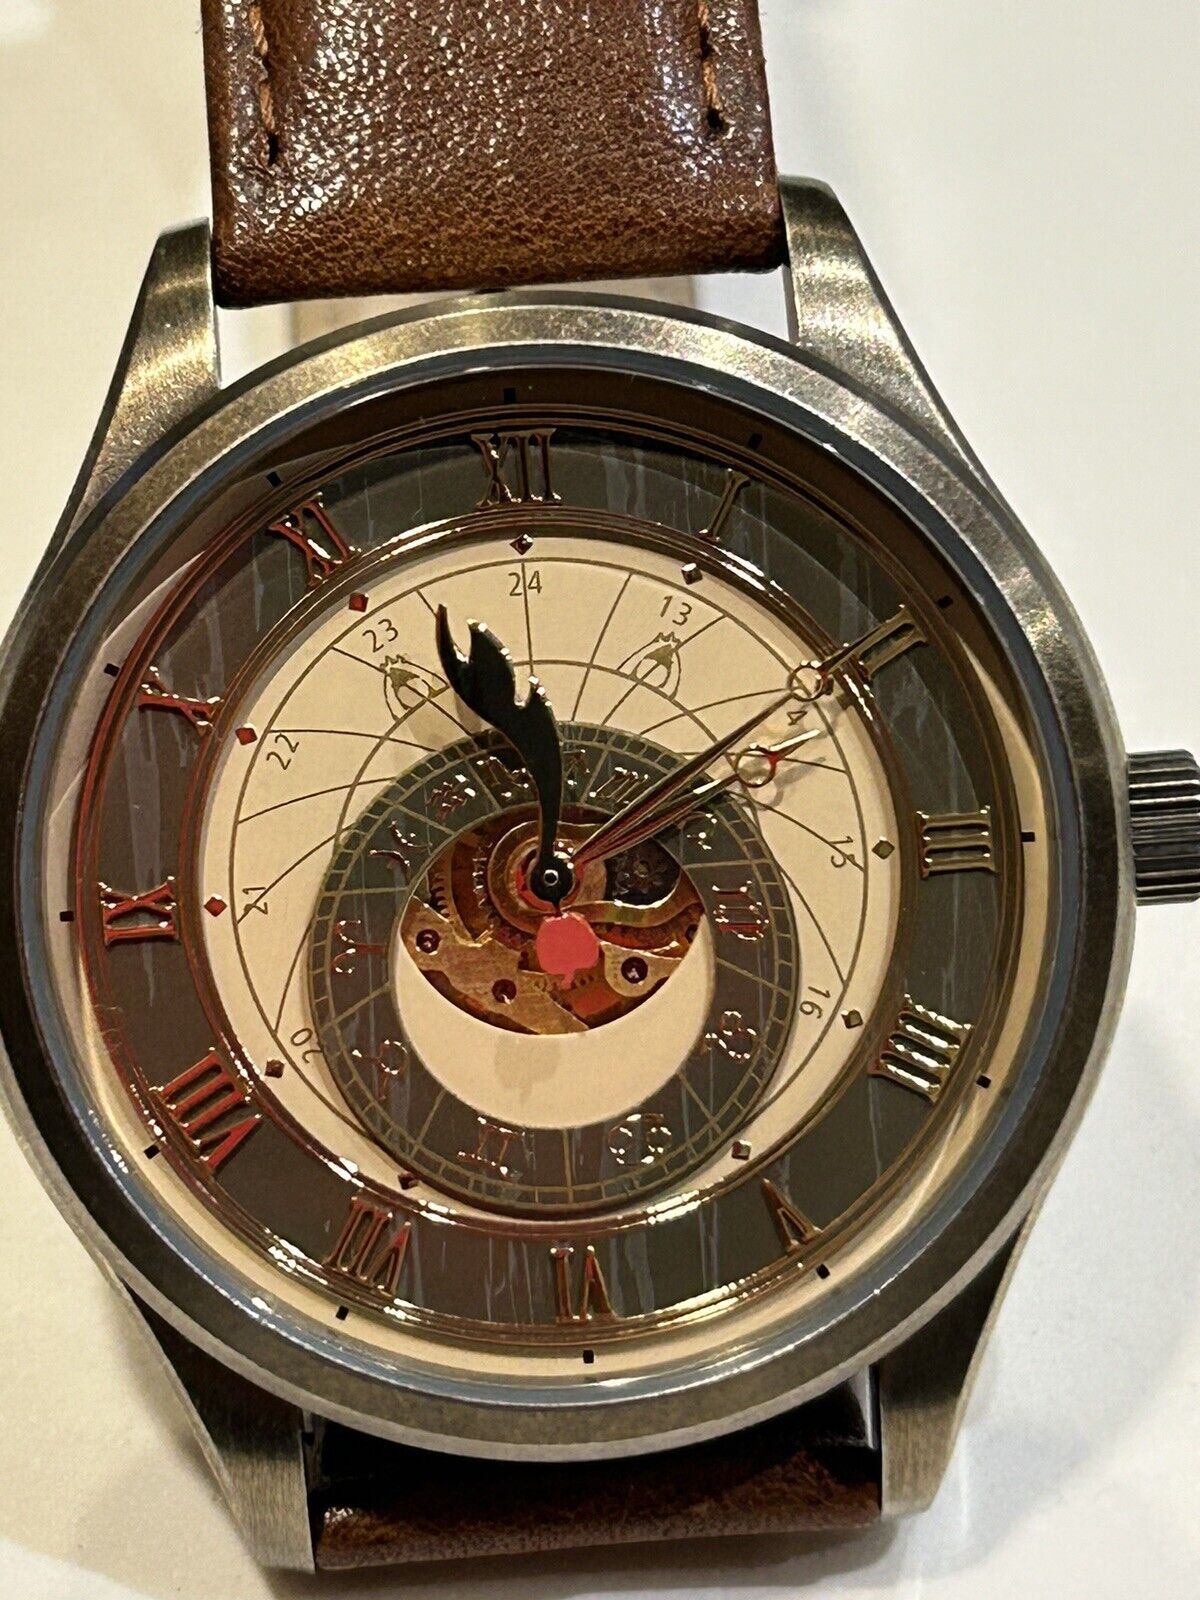 Holo Model Watch Spice and Wolf: Merchant Meets The Wise Wolf Anime Watch